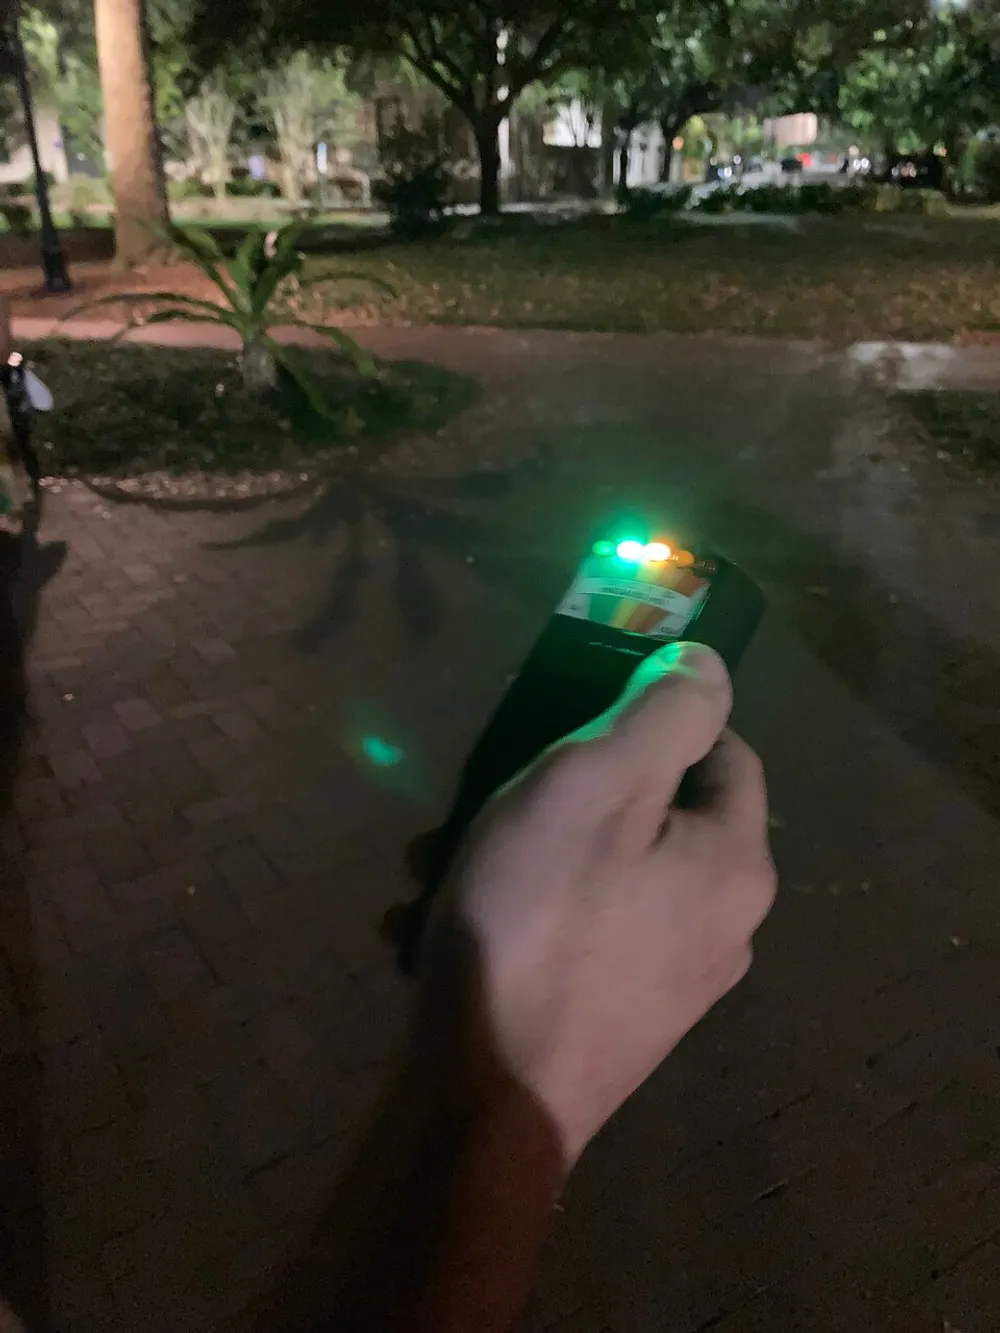 A person is holding a device with glowing lights possibly a measurement tool or electronic gadget in a dimly lit outdoor setting at night